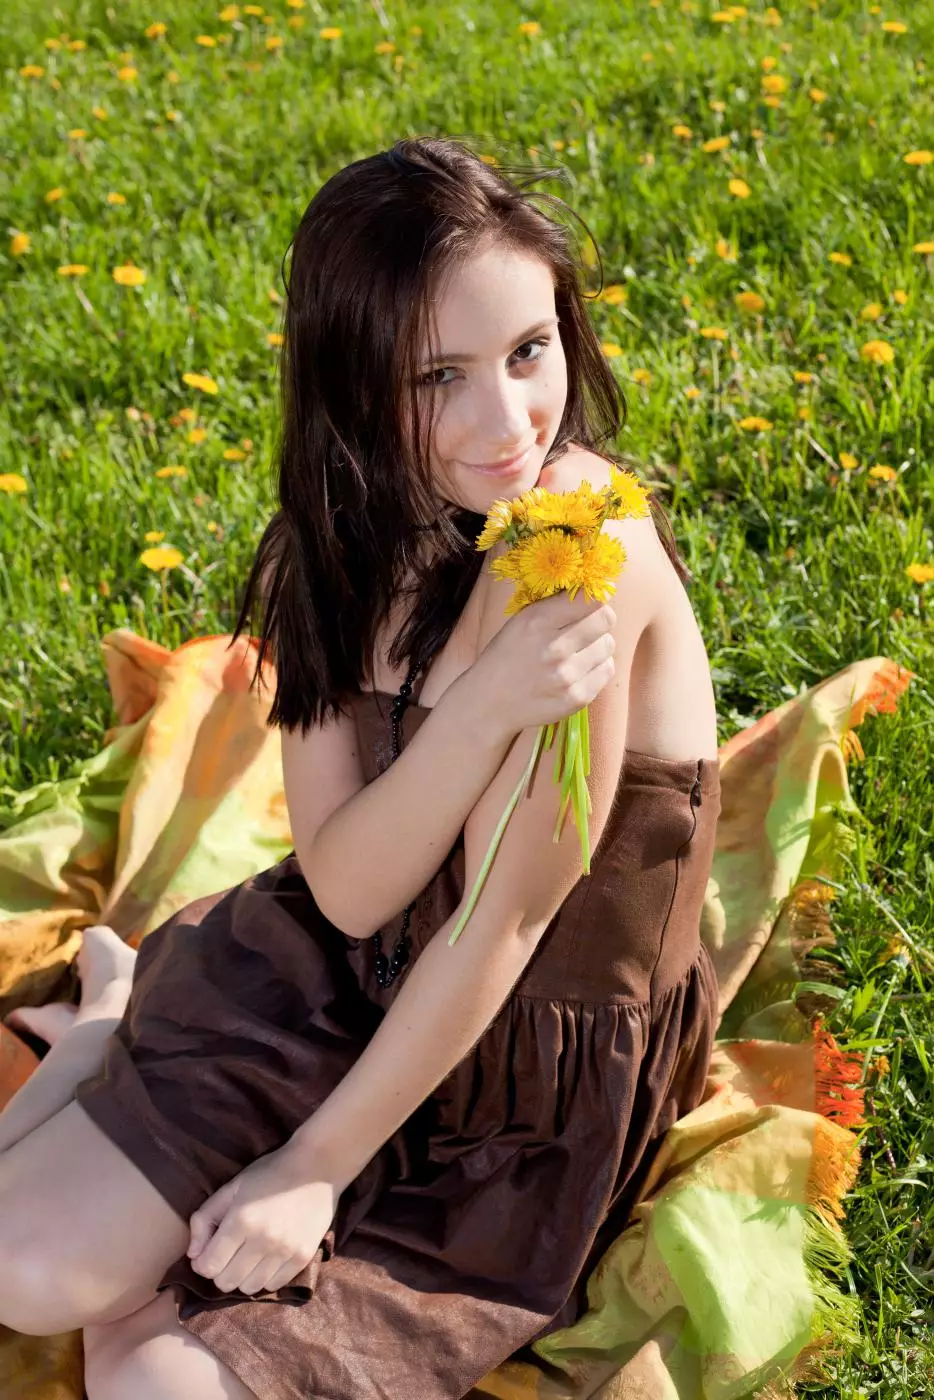 Brunette teen Victory Nubiles willing to enjoy the soft green grass and tender sun with naked body